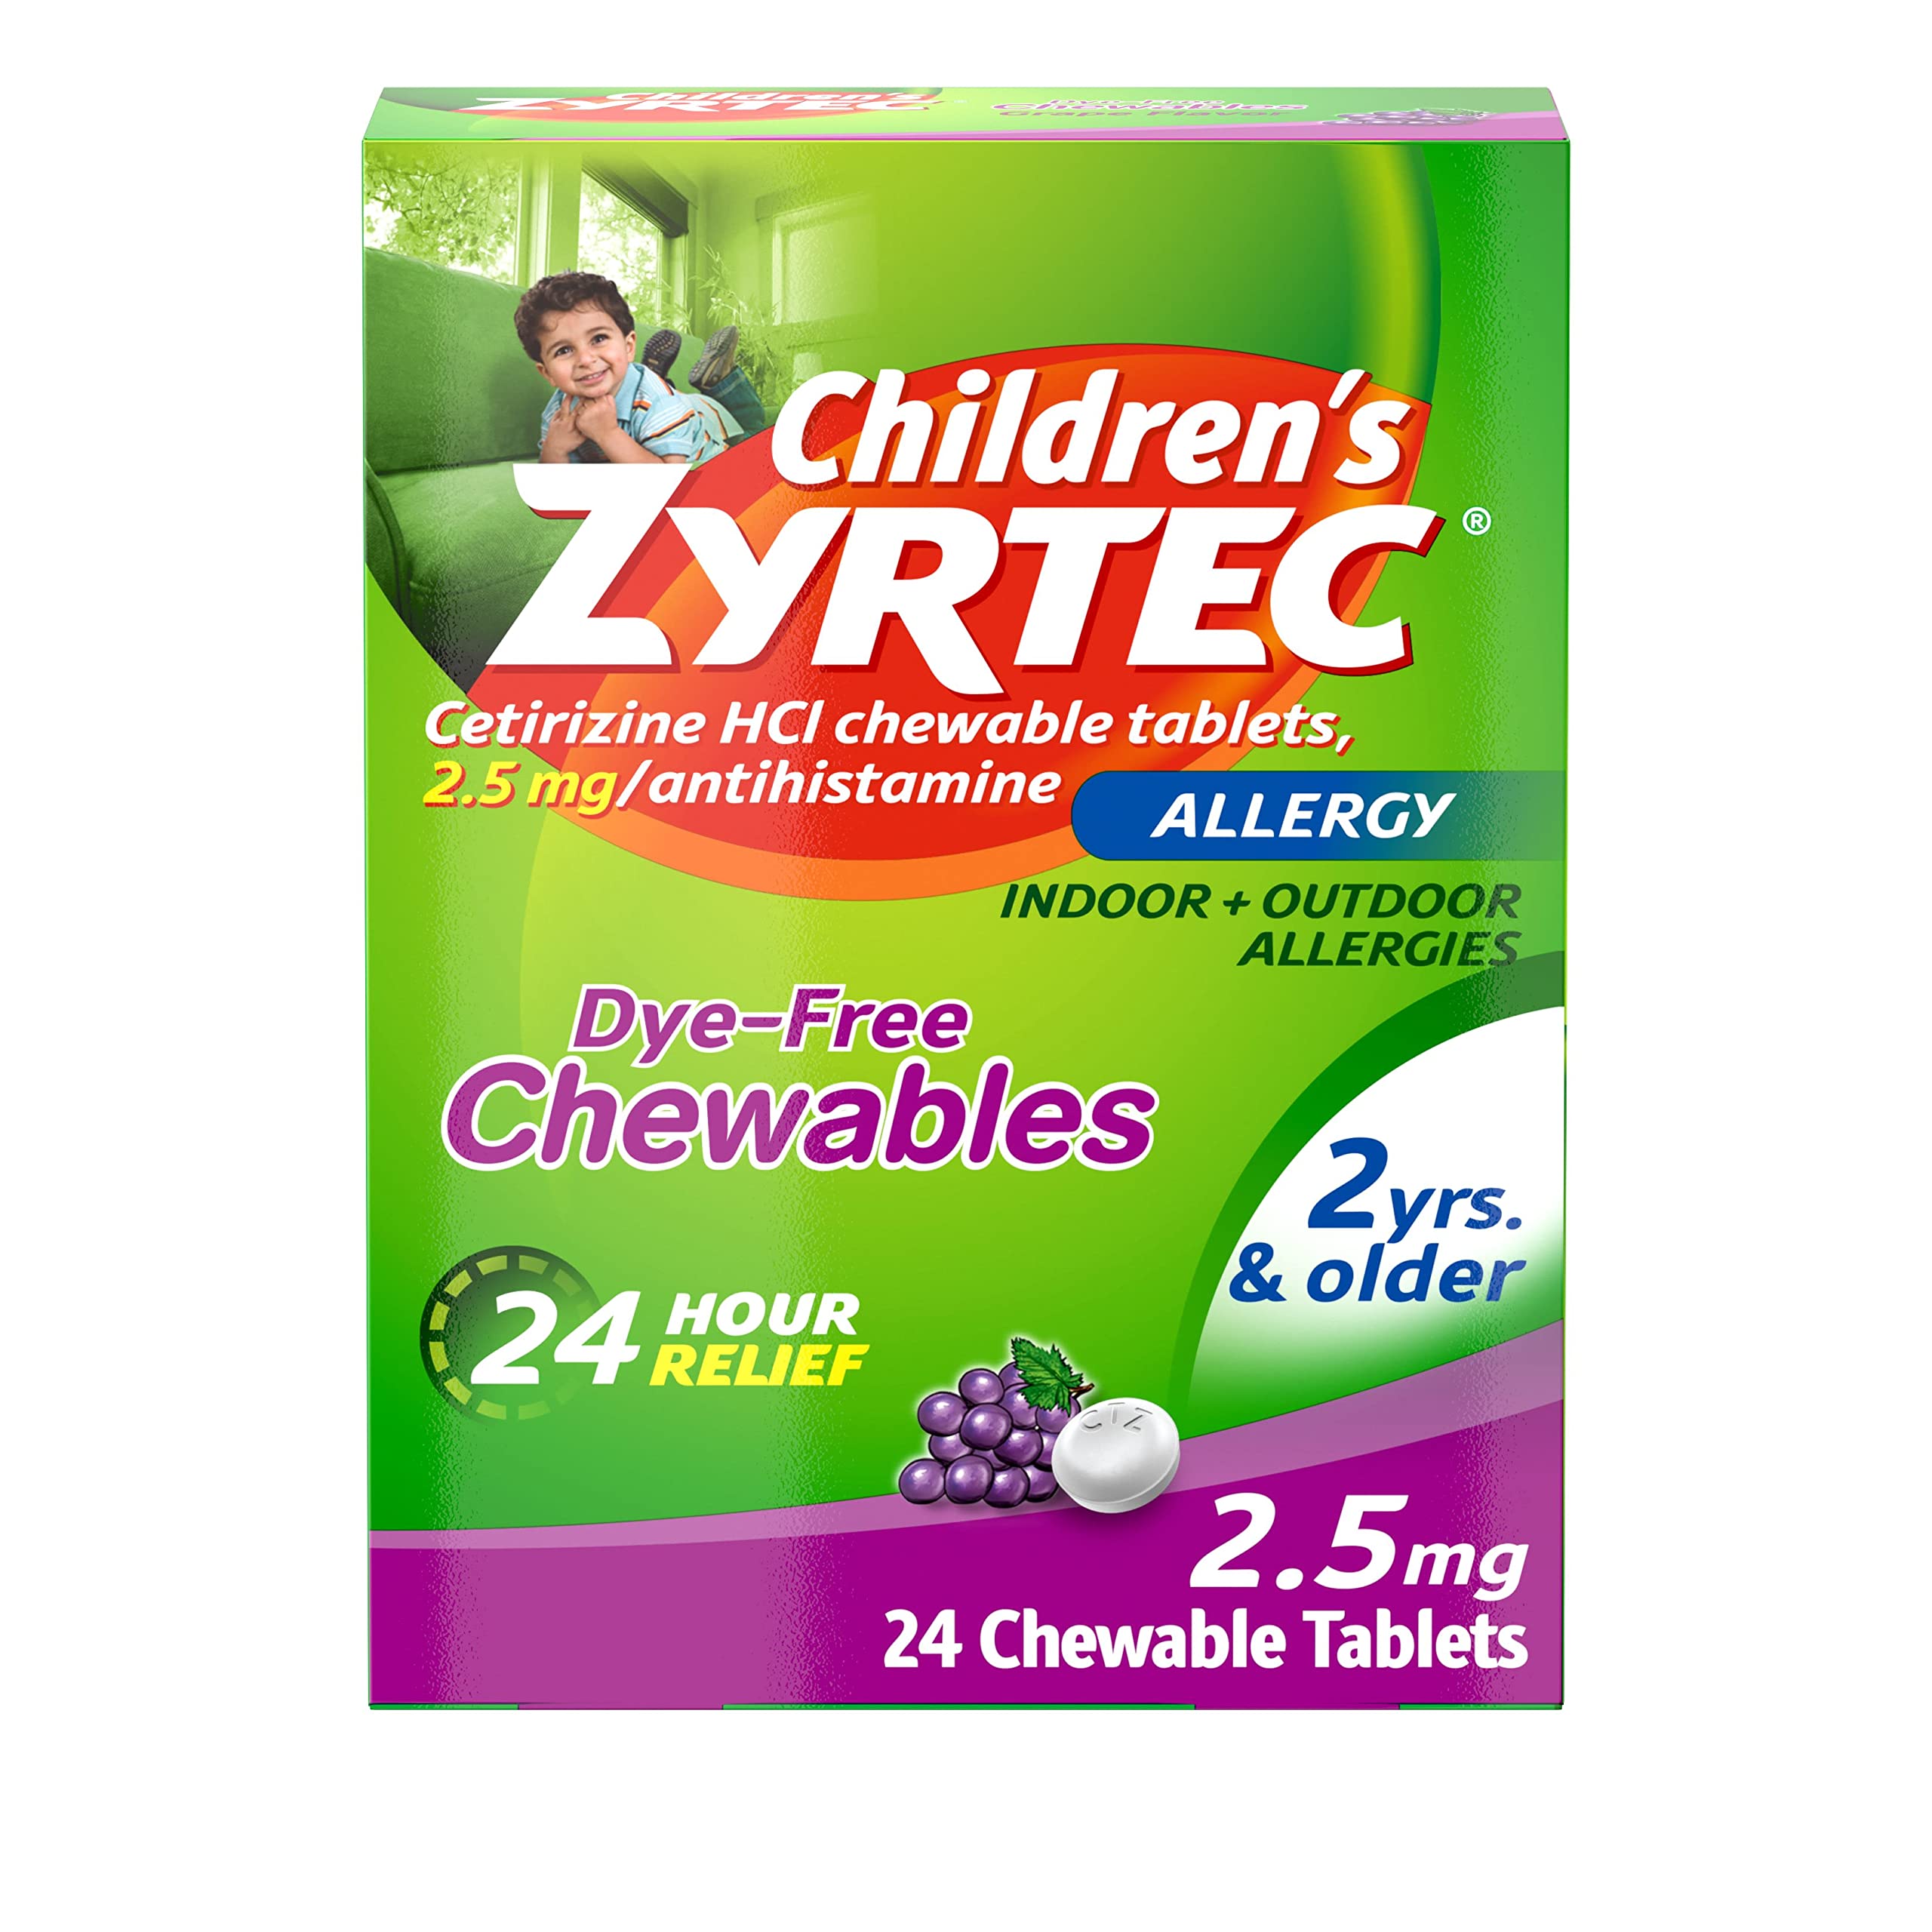 Zyrtec 24 Hour Children's Allergy Grape Chewables, 2.5 mg Cetirizine HCl Antihistamine per Tablet, Allergy Medicine for Kids Relieves Sneezing, Itchy Throat & More, Dye-Free, Grape, 24 ct